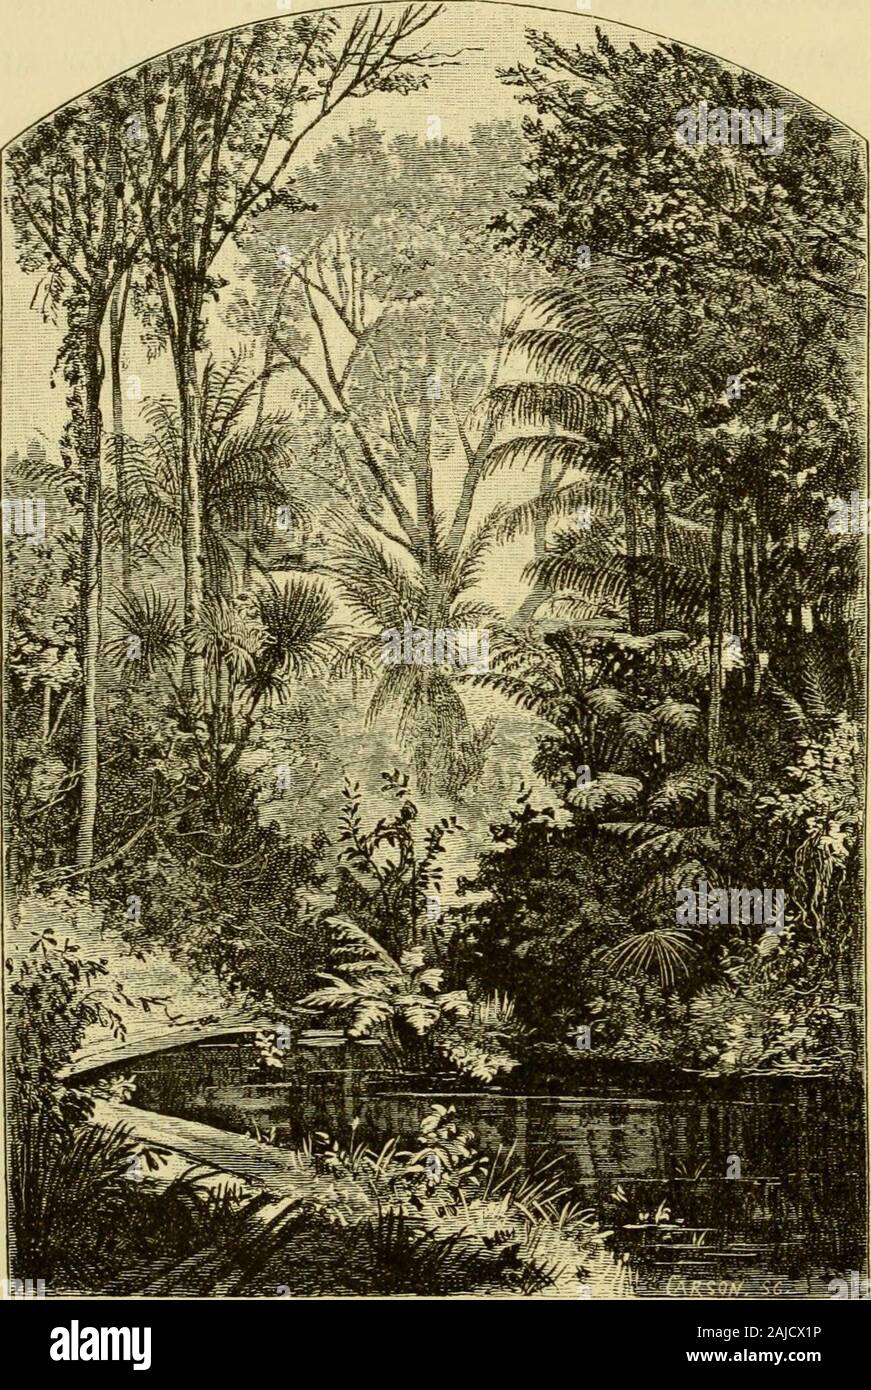 Brazil, the Amazons and the coast . eculiar to the ground ;you see patauds || taking the place of the uauassiis ; andback of all is the great, rolling forest, the Brazil-nut treestowering over it with domes a hundred feet across : all thisin contrast to the sunny meadows, and the placid lake, andthe cloudless sky. Lake jMacura receives a little tortuous igarape ; it is nar-row, and deep, and swift, navigable for large canoes, and •* Mauritia carana. t Cassicus cristatus ? X Trupialis Guianensis. § Cassicus, sp. Ij CEnocarpus pataua. 3i8 BRAZIL. the banks are sharply cut. These features disting Stock Photo